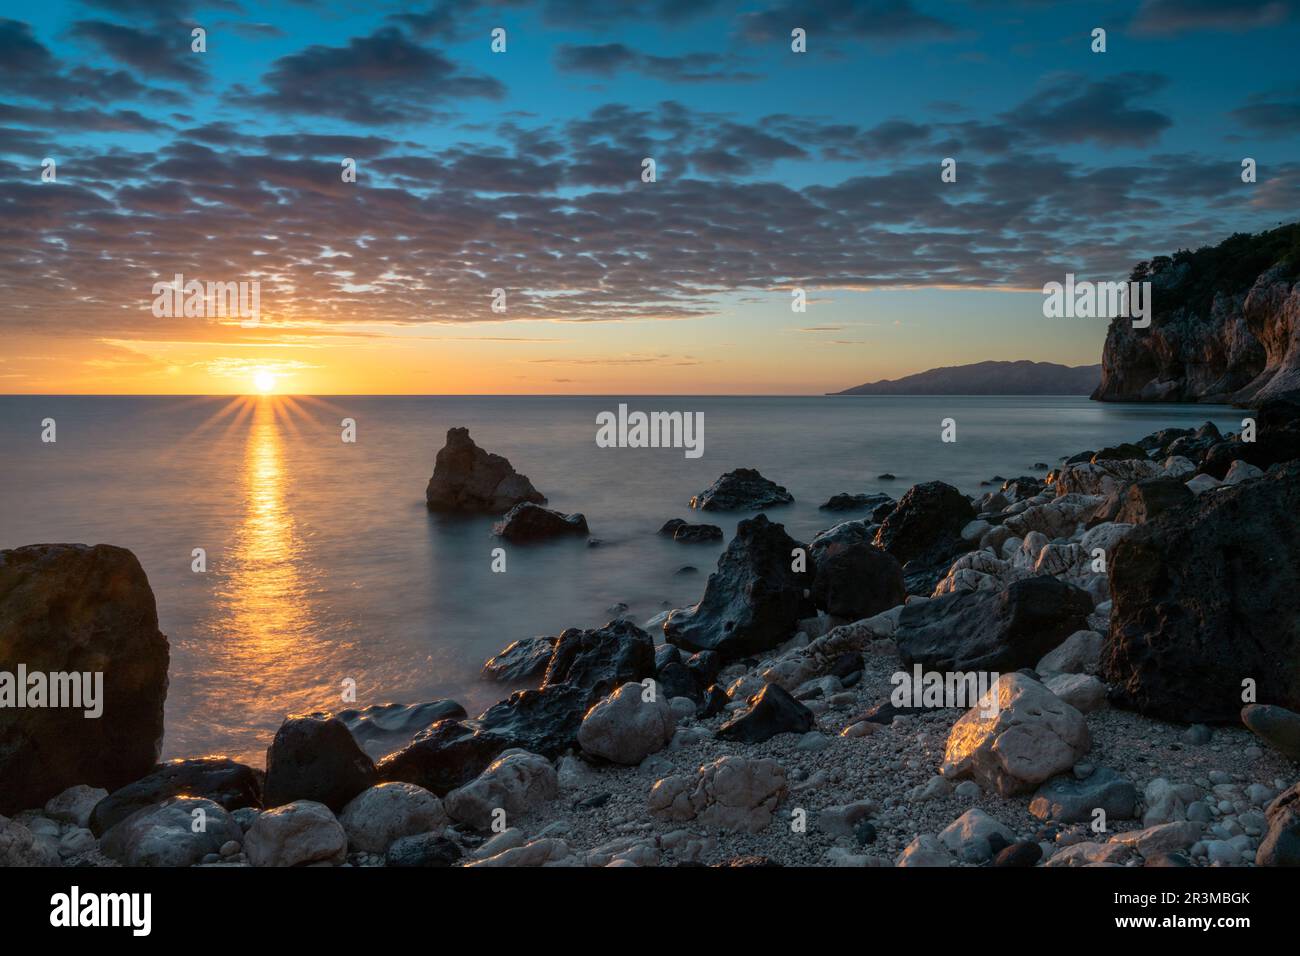 A colorful sunrise at Cala Gonone with black and white rocks and boulders and a sunburst Stock Photo